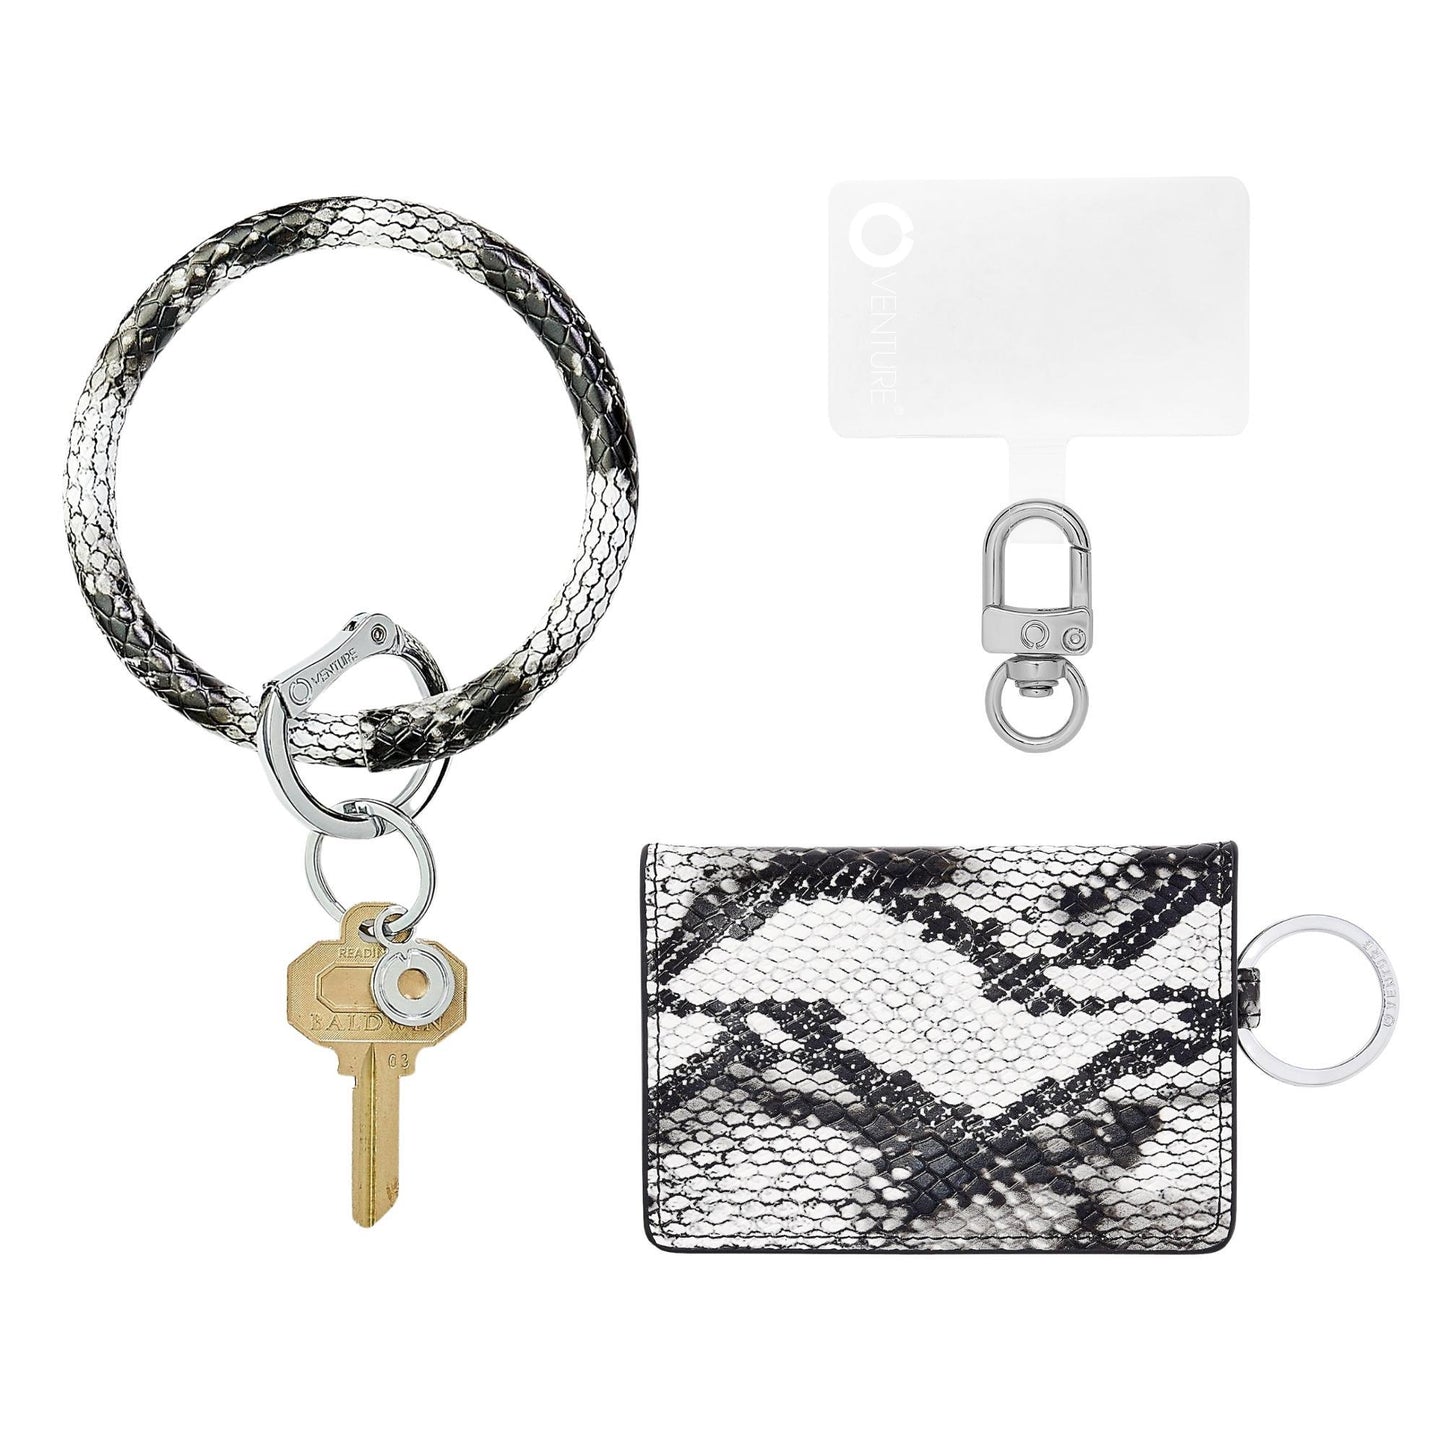 Leather Big O Key Ring in Tuxedo Snakeskin, Leather ID case in Snakeskin Tuxedo in back in black and phone hook me up connector